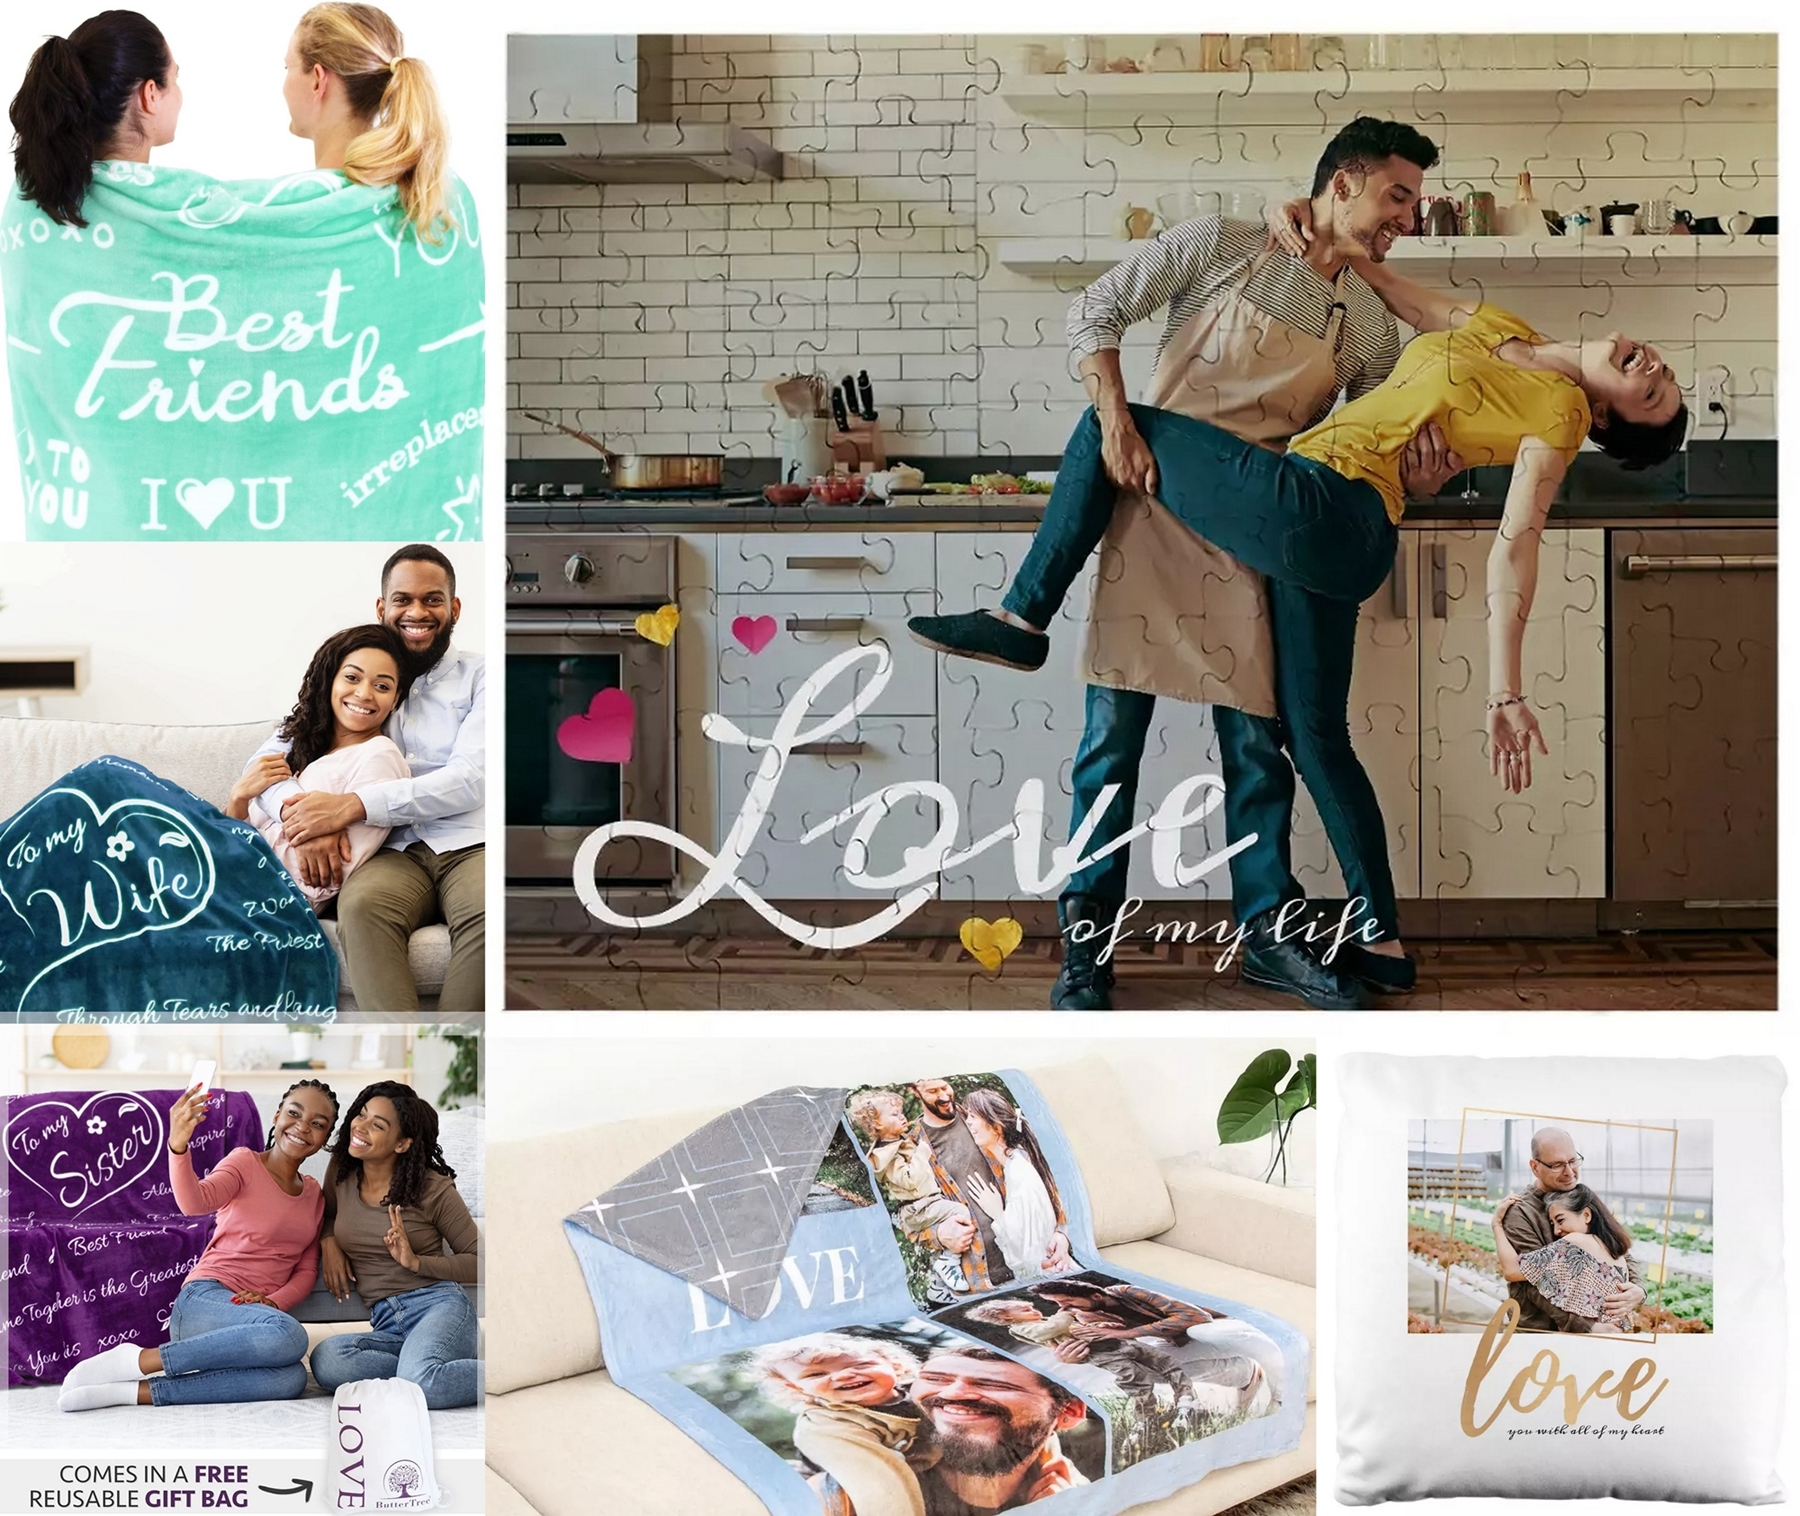 Celebrate Your Loved Ones Personalized Valentine's Day Gifts